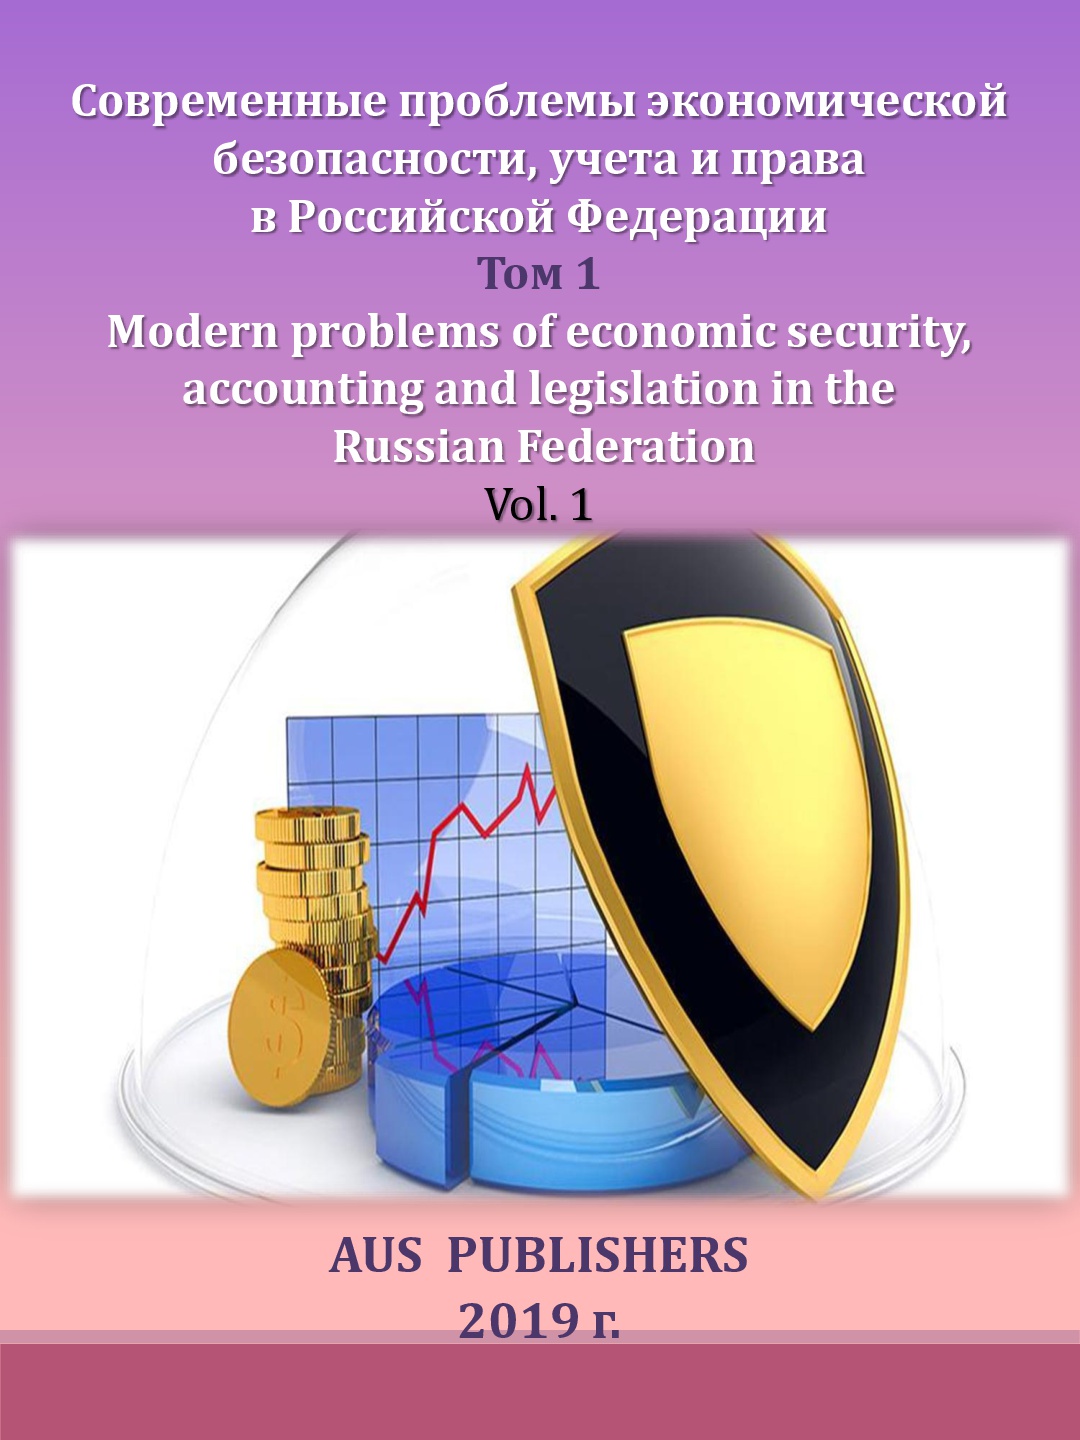                         FEATURES OF LEGAL REGULATION OF ECONOMIC SECURITY IN RUSSIA
            